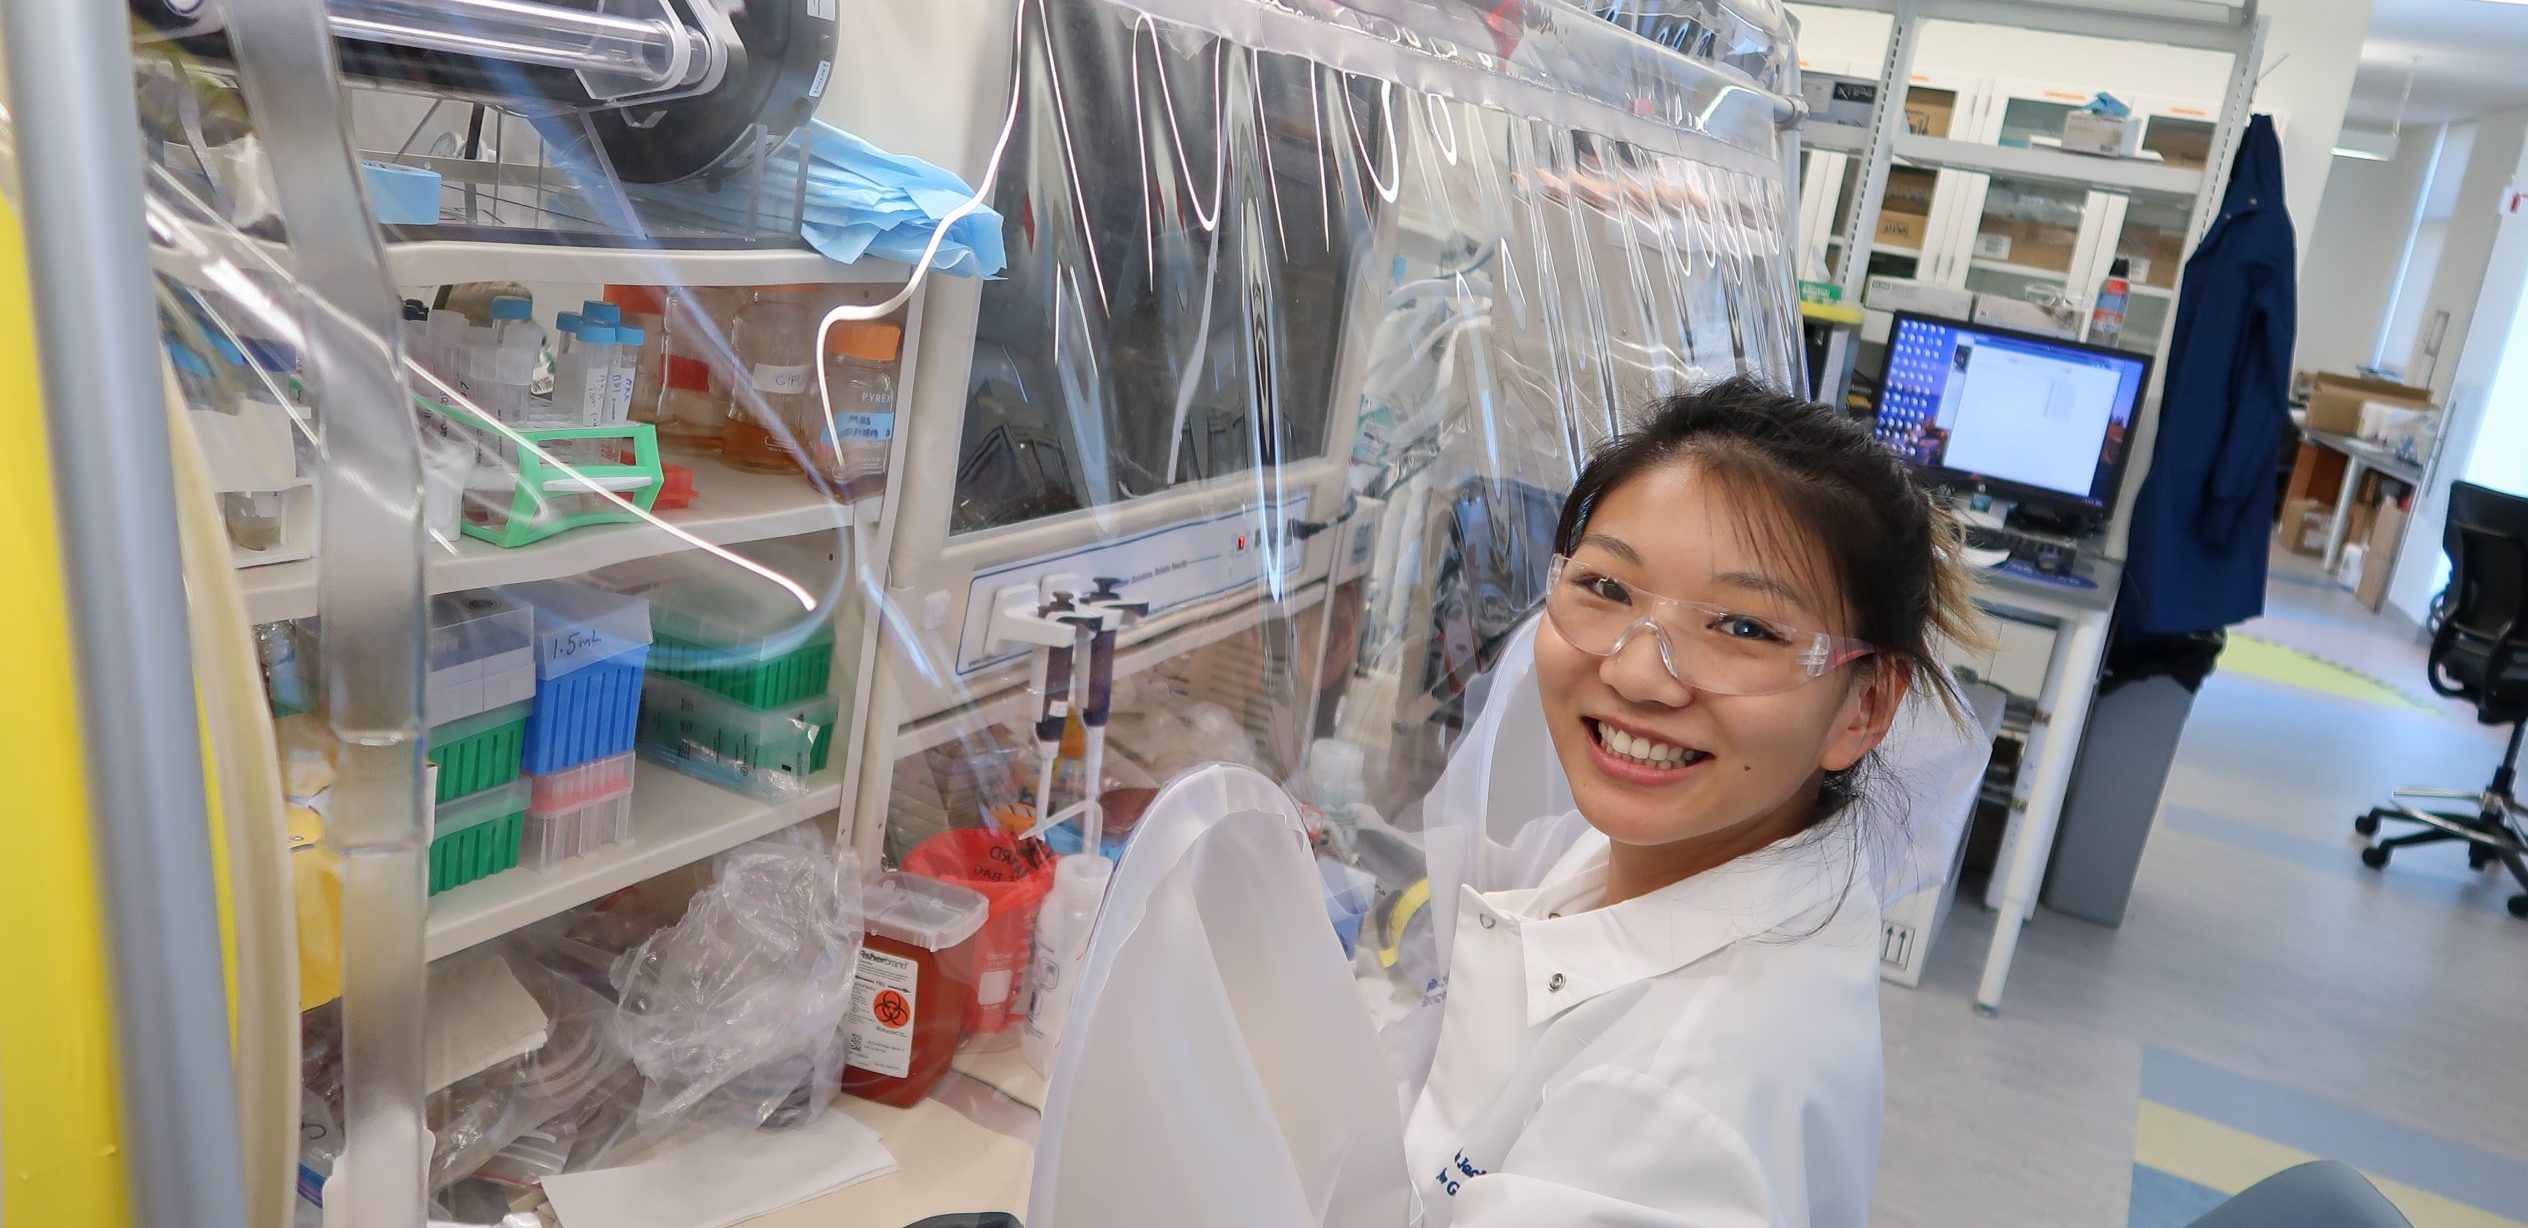 M.D./Ph.D. Candidate Jennifer Chung wearing lab coat and goggles in the Jackson Laboratory for Genomic Medicine smiling, working in an anaerobic chamber